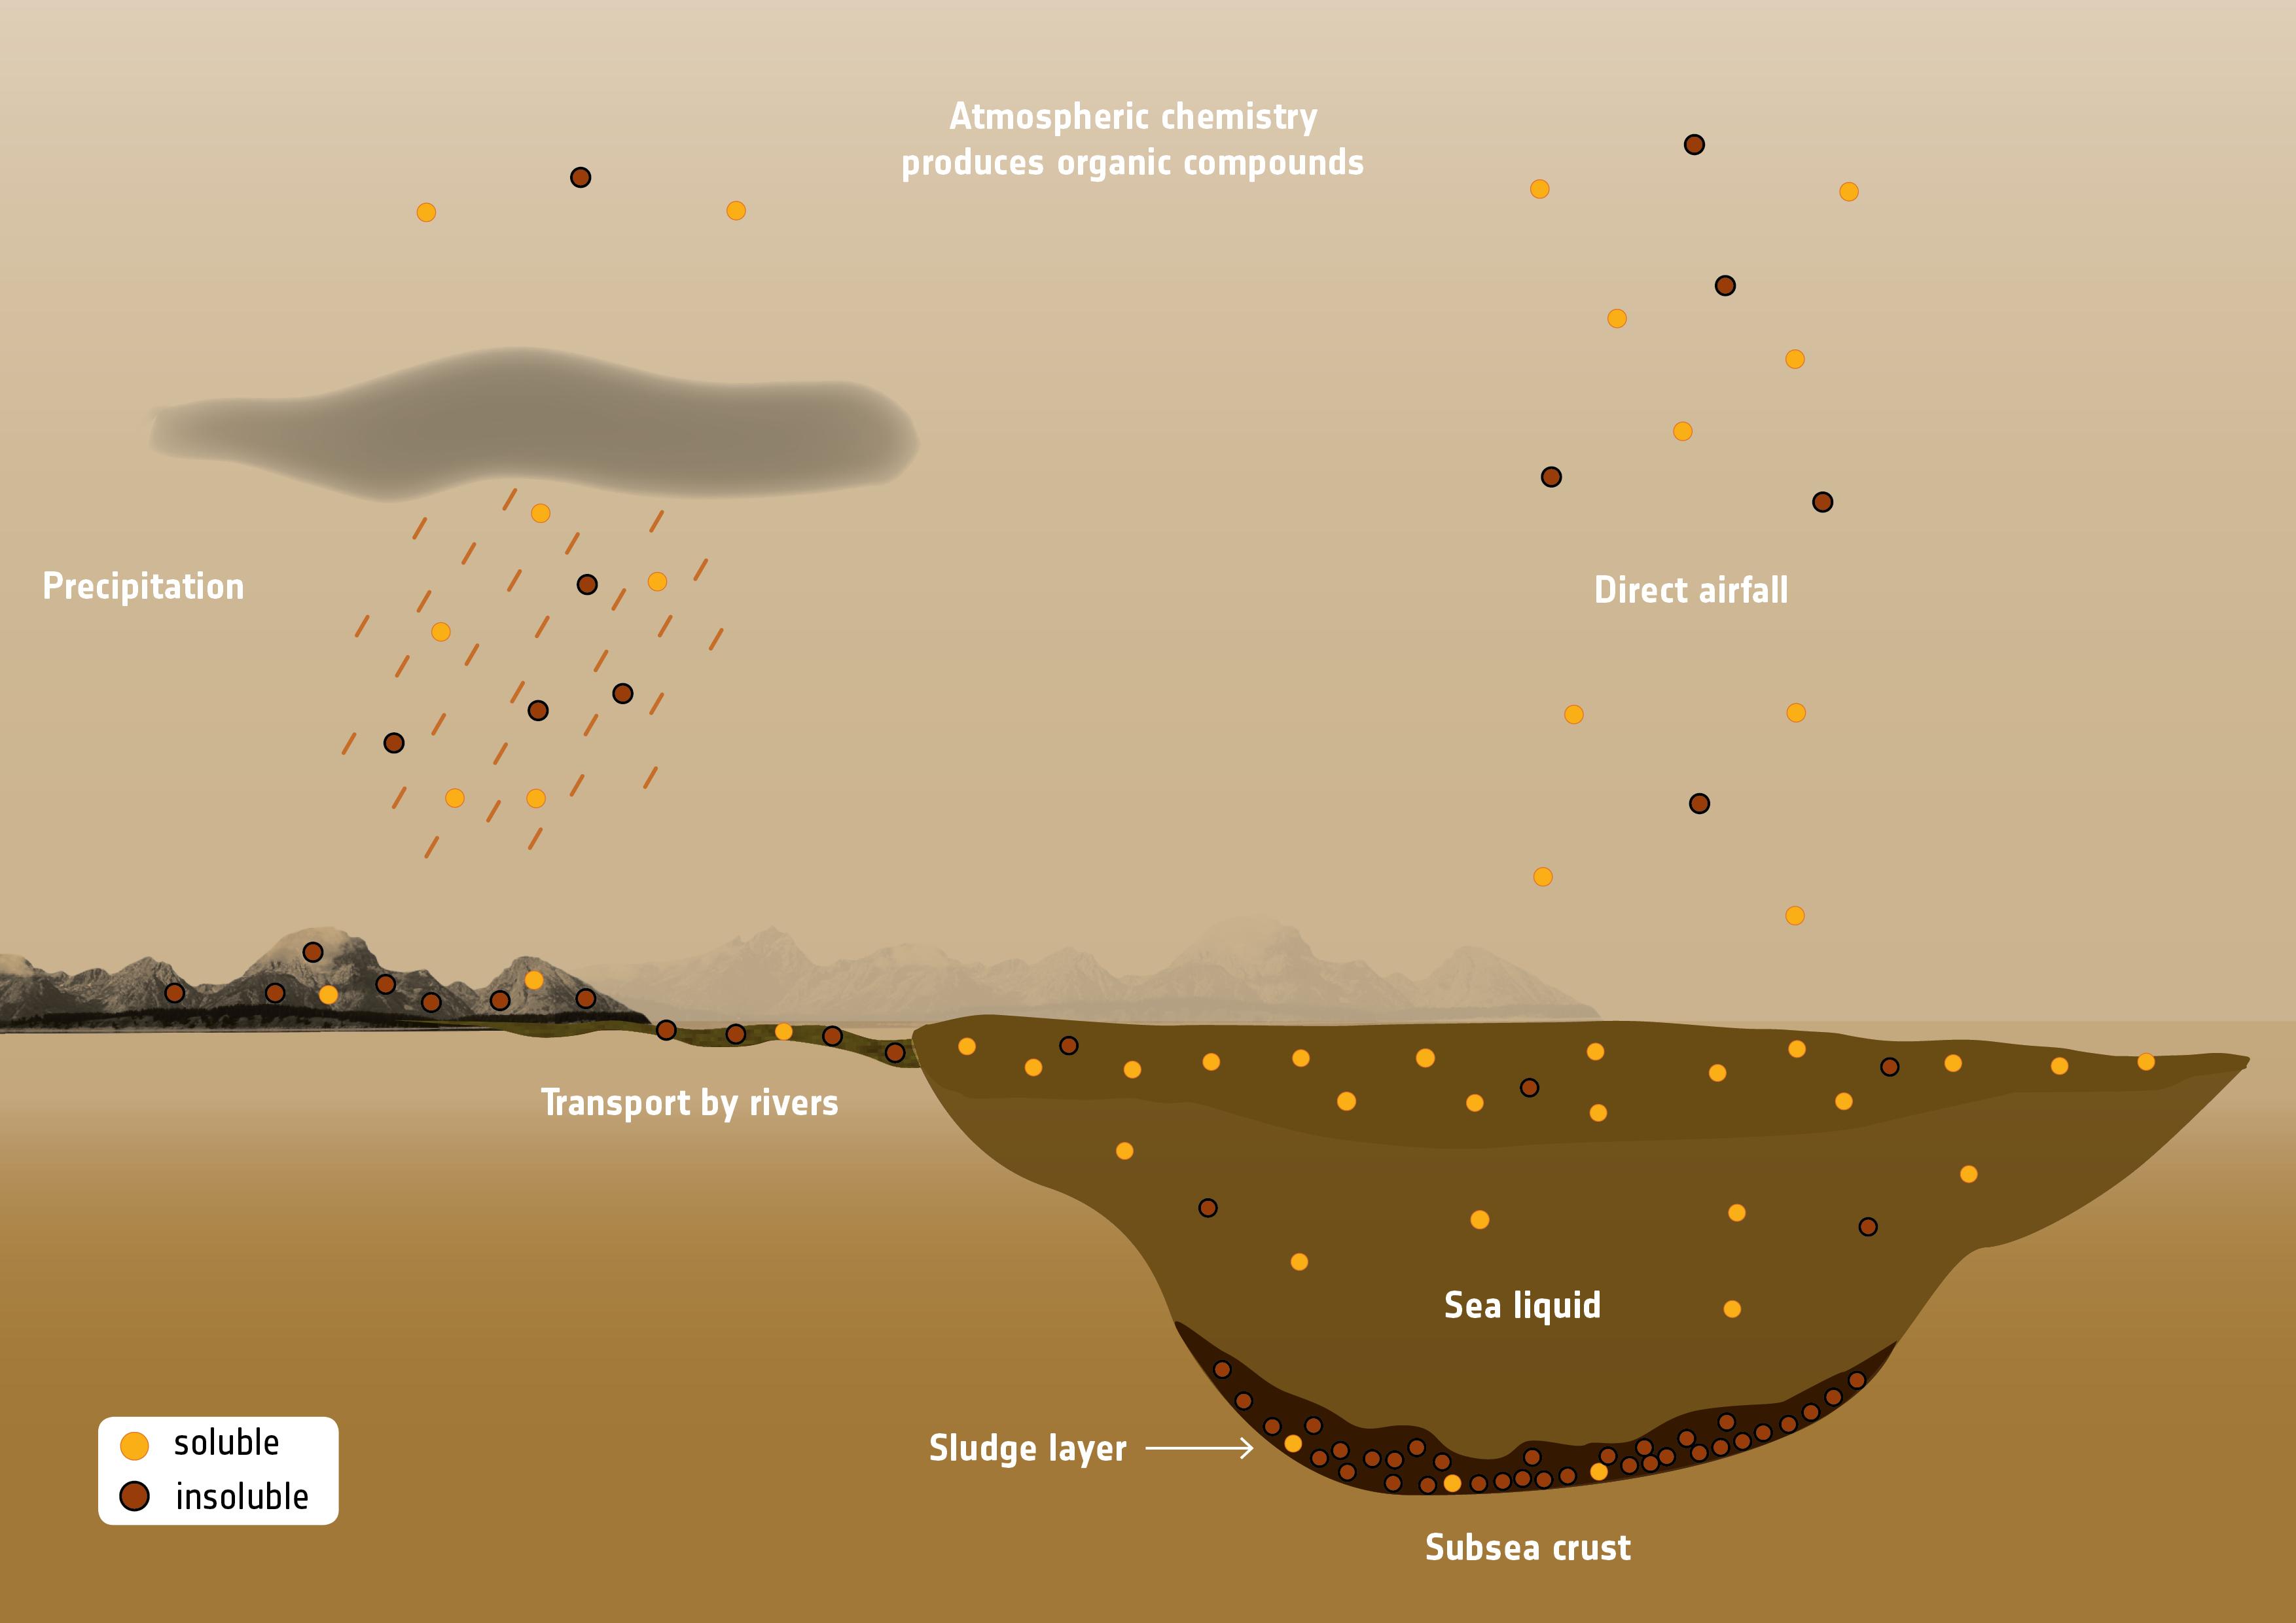 A schematic showing the creation, precipitation and transport over the surface of organic compounds. 
Image credit: ESA. Image credit: None